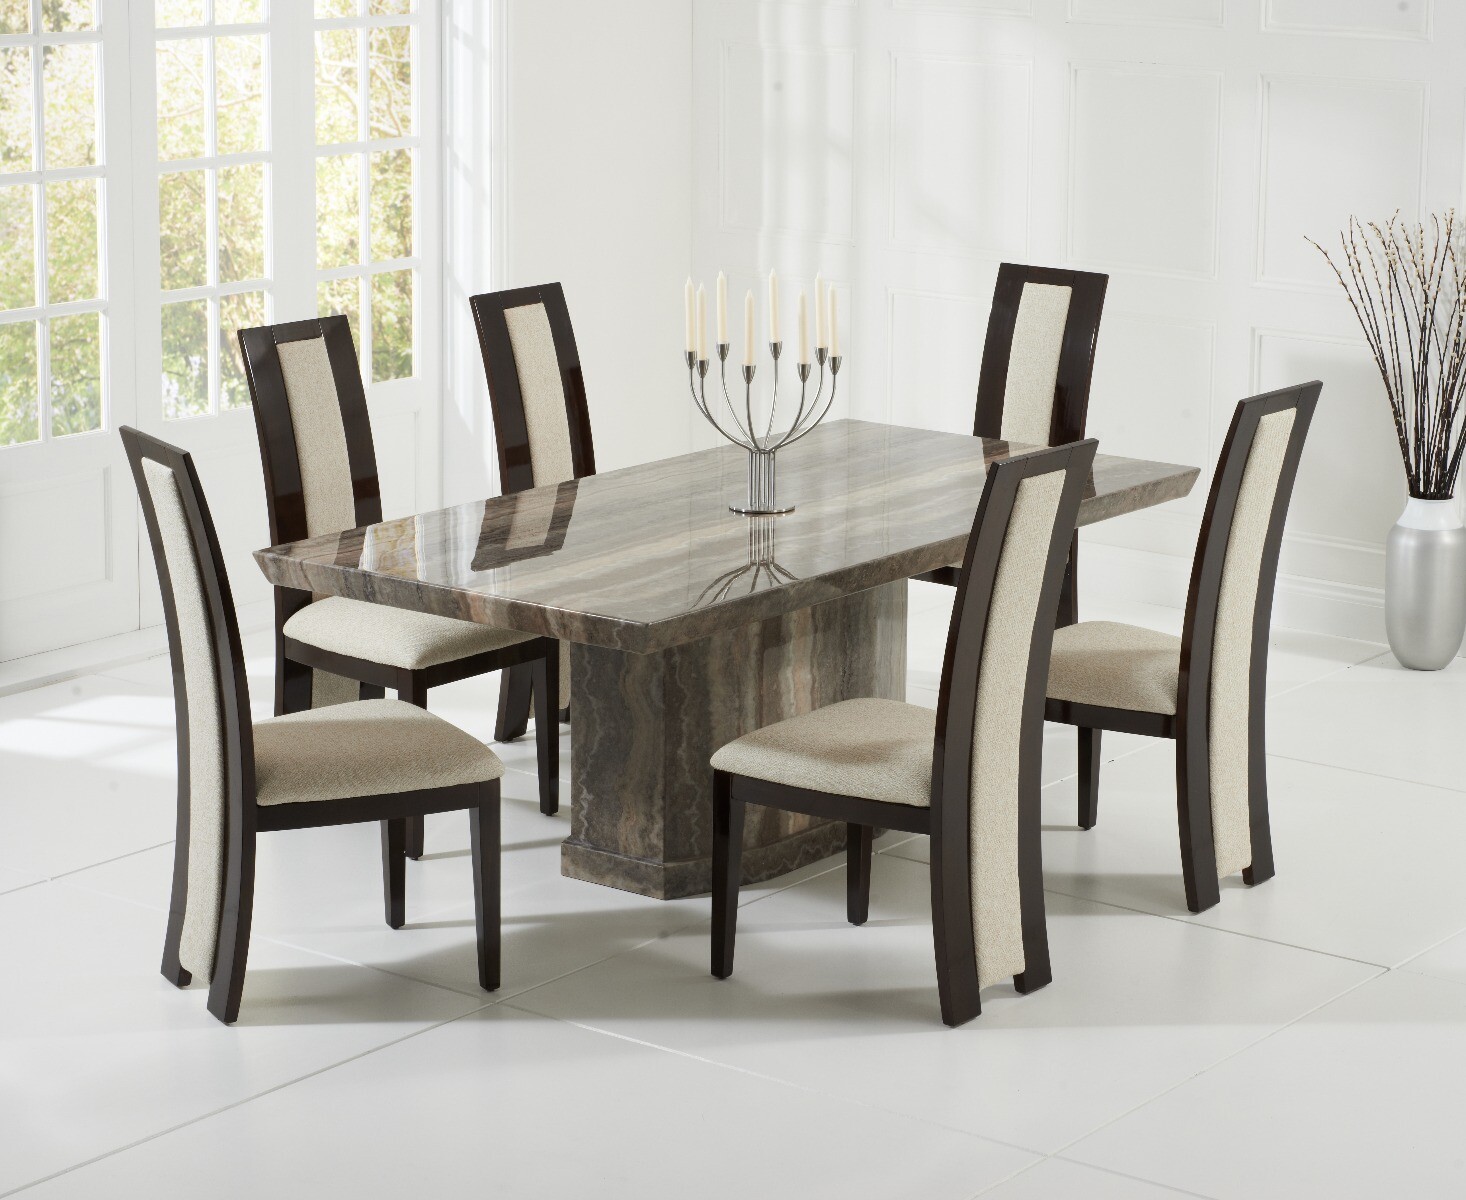 Carvelle 160cm Brown Pedestal Marble Dining Table With 4 Black Novara Chairs